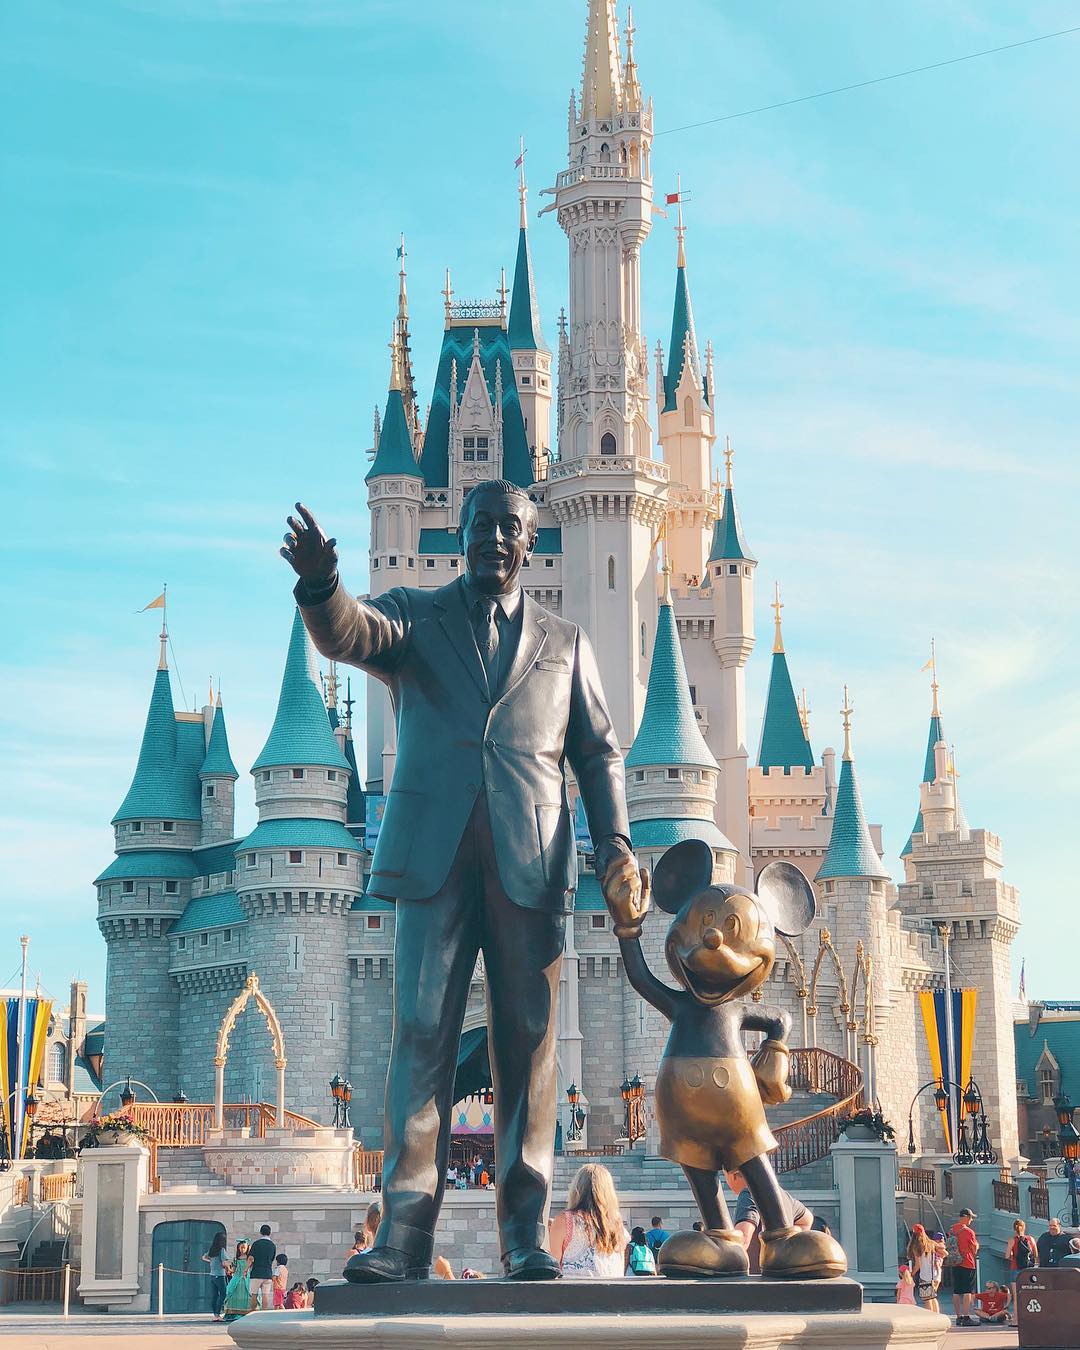 Closeup of statue of Walt Disney holding hands with Mickey Mouse with the Cinderella Castle in the background Photo by Instagram user @wisheseverafter